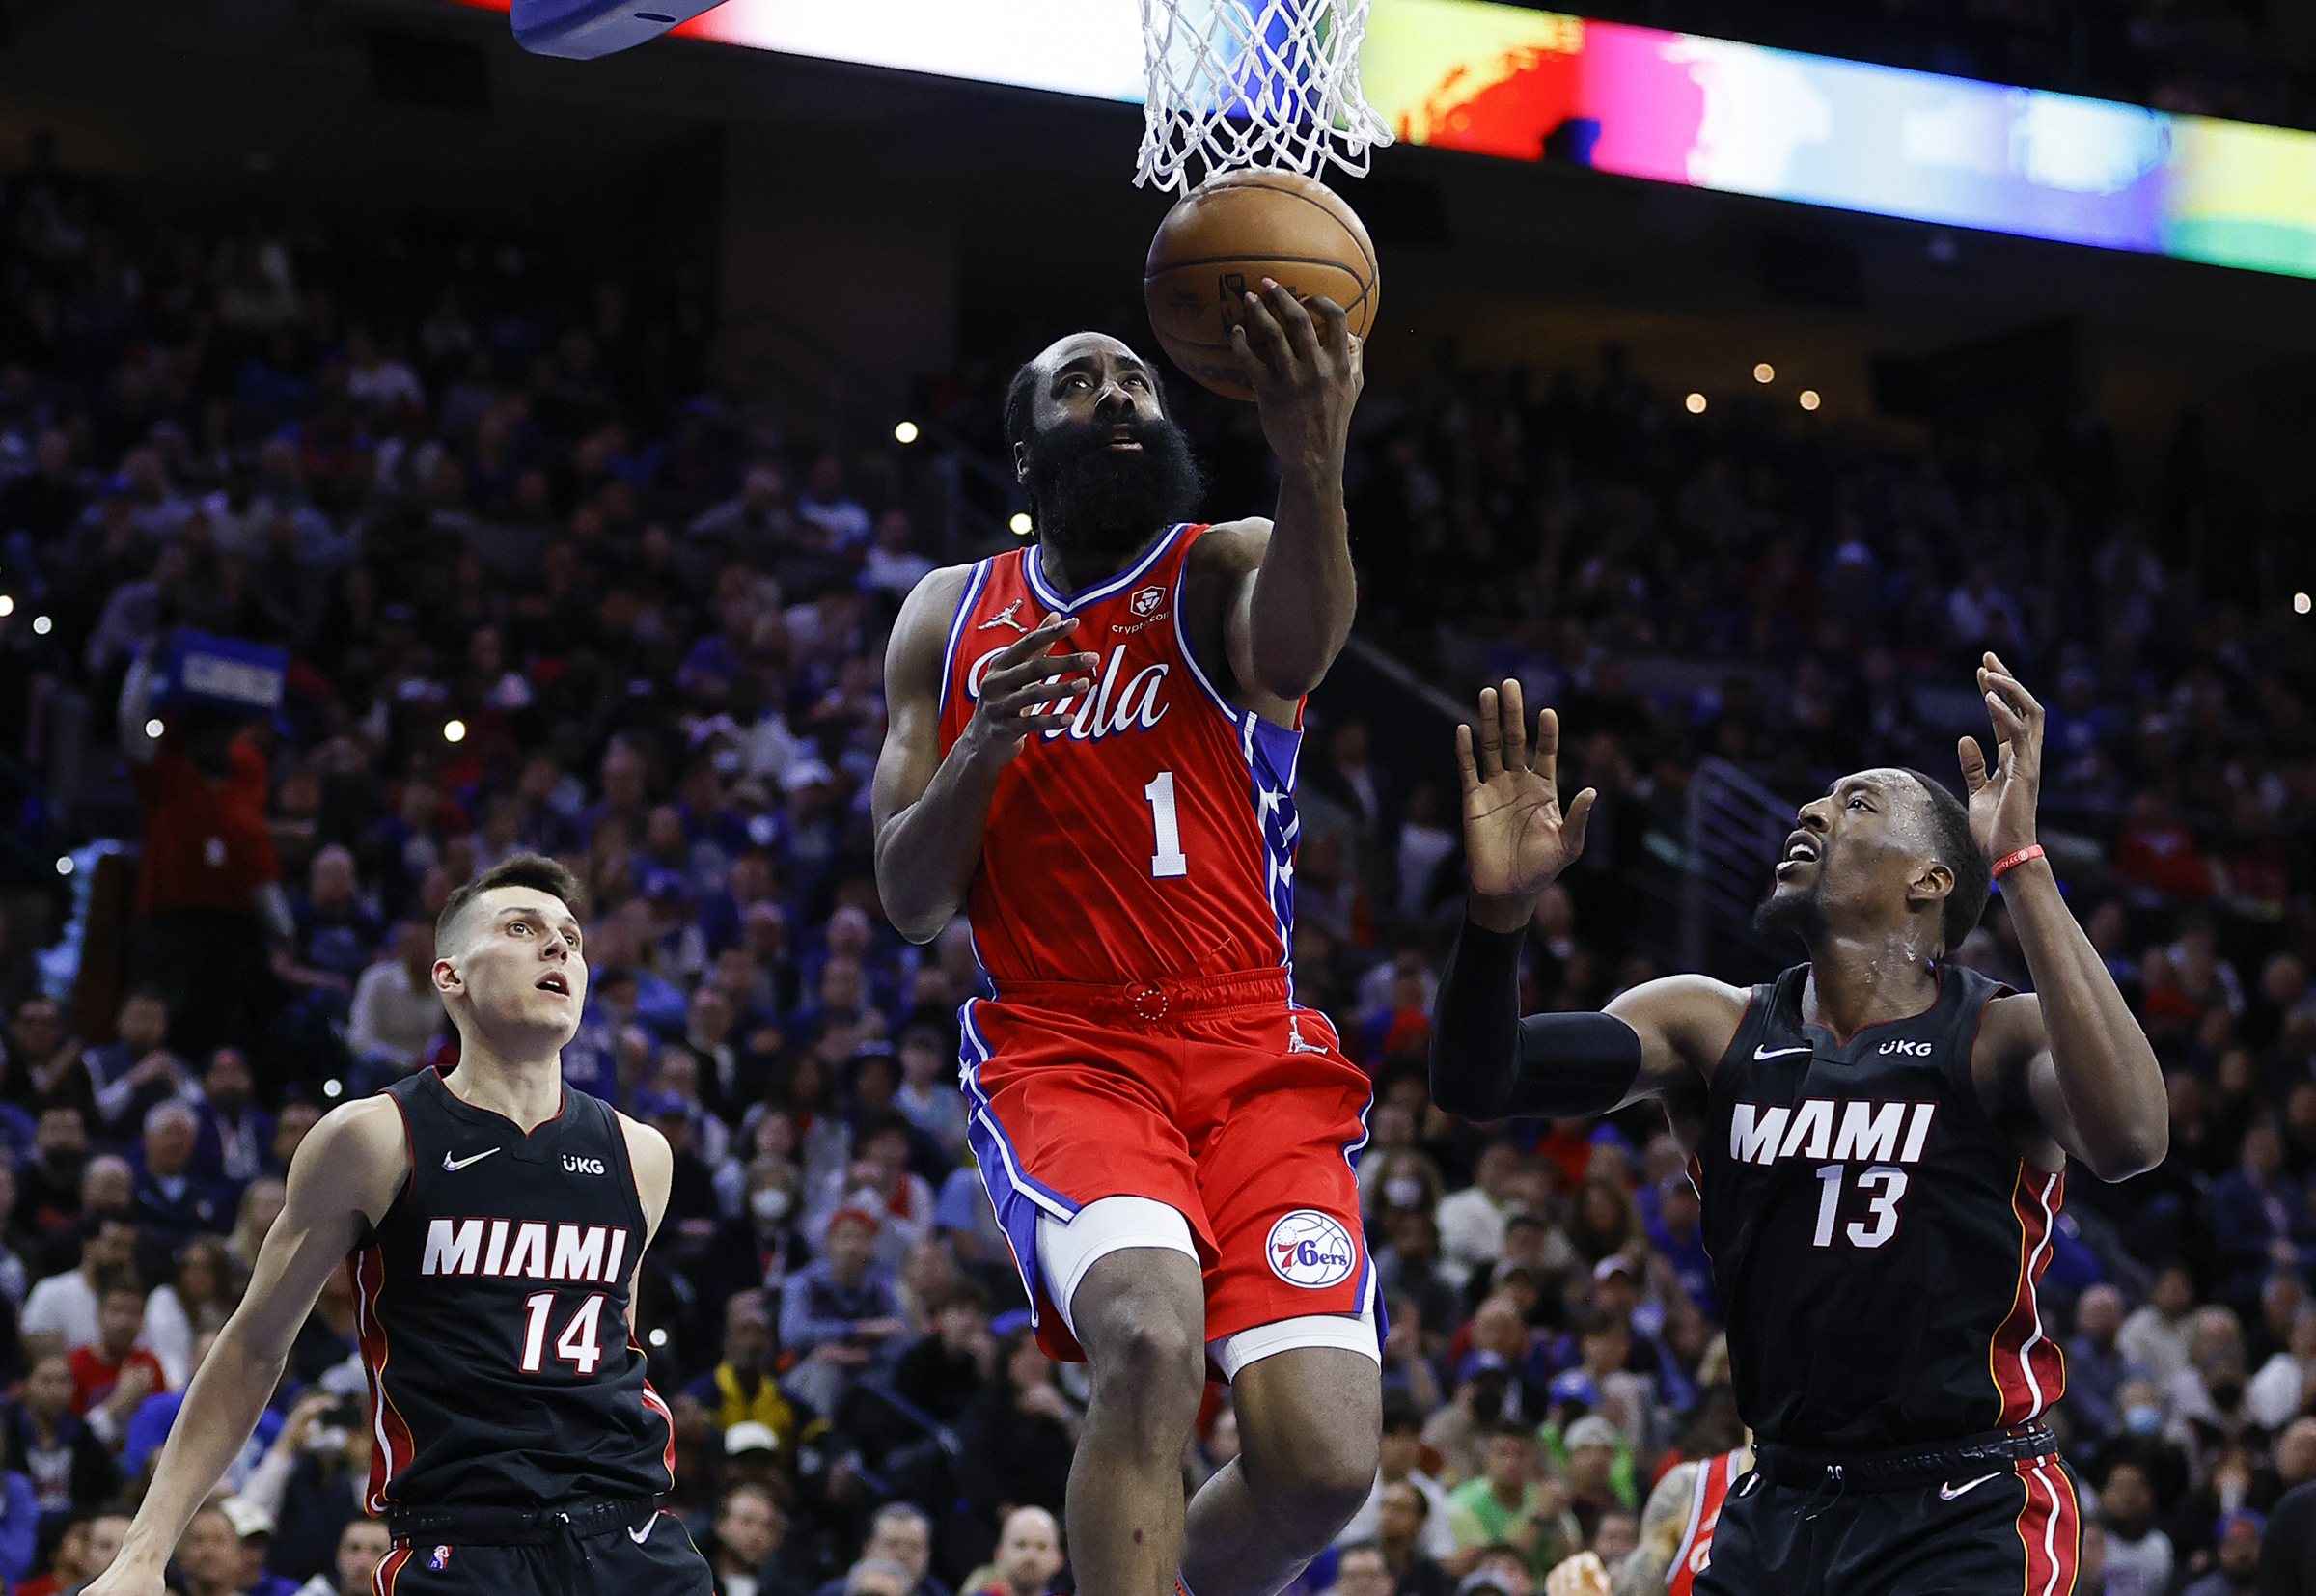 Heat swarm 76ers in Game 6 to clinch series and spark James Harden